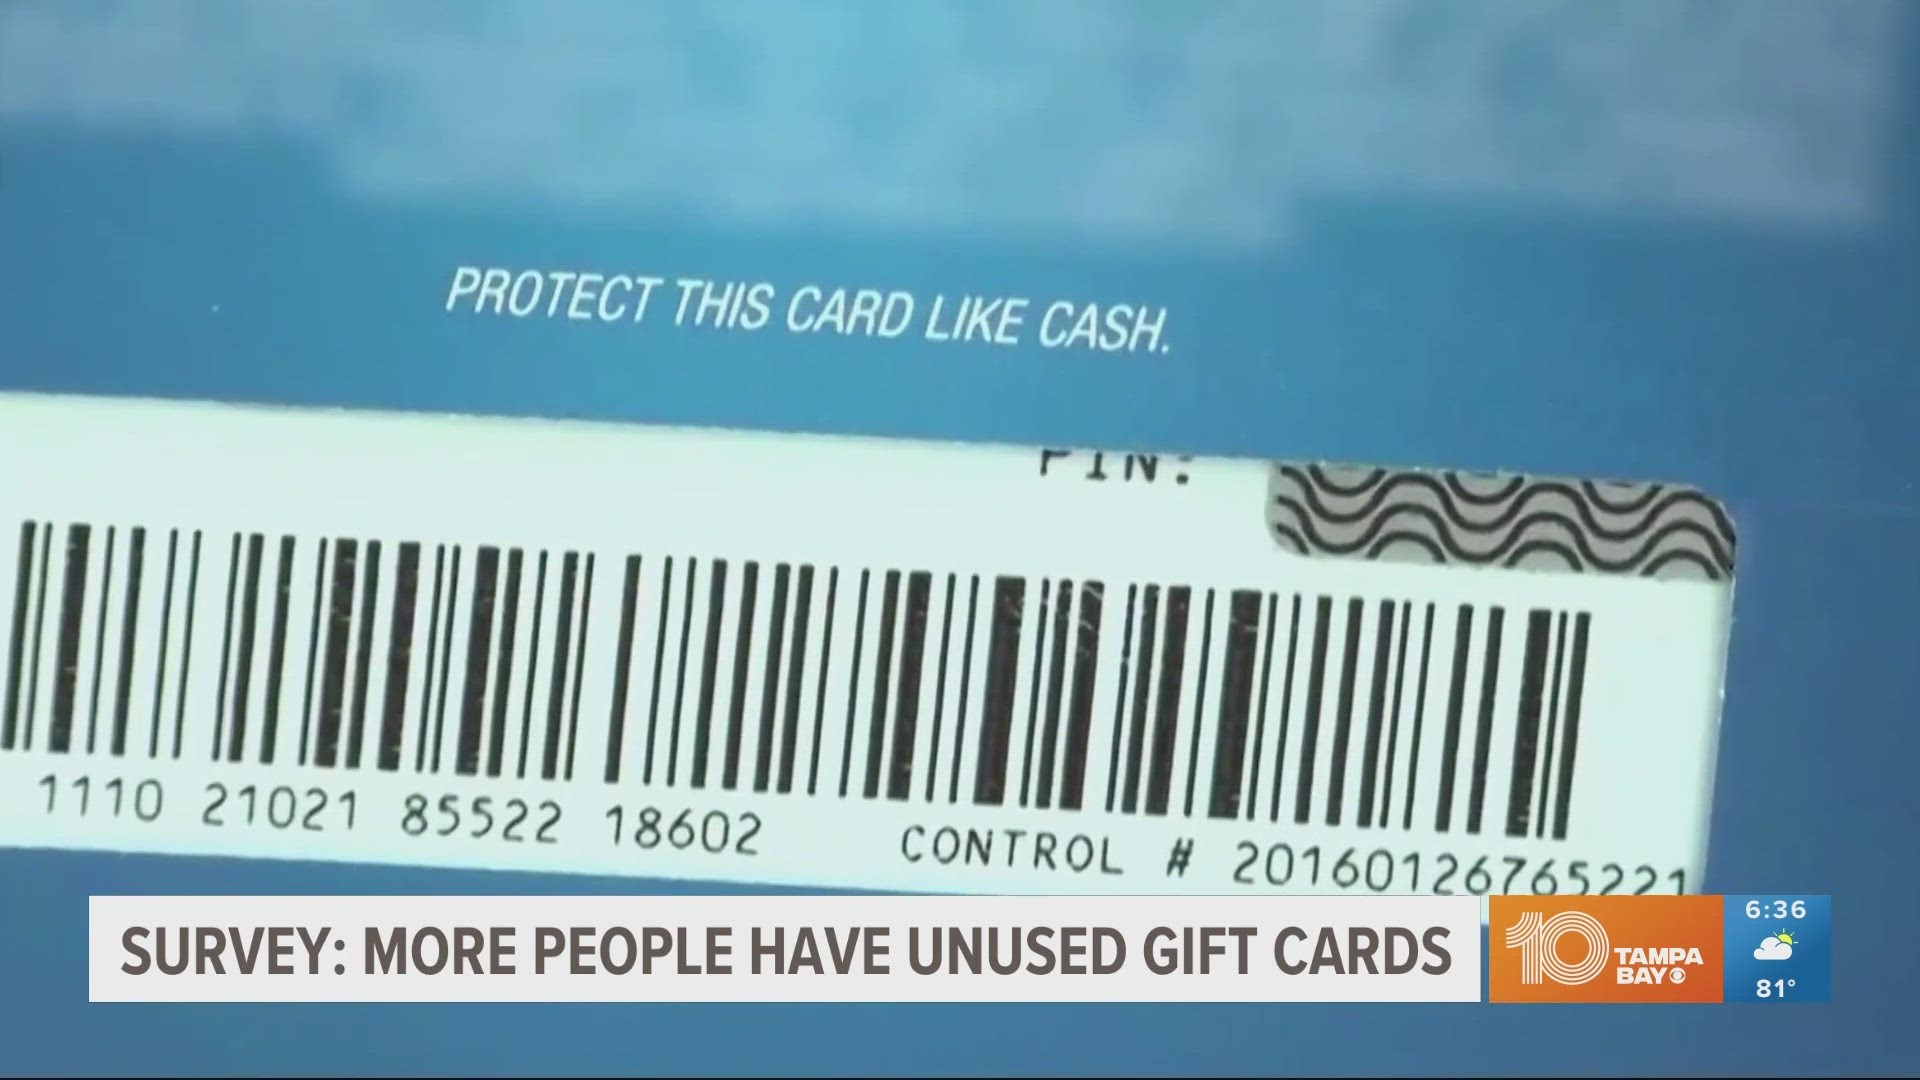 Despite high interest rates and inflation, a new survey shows 47% of Americans are holding onto unused gift cards.